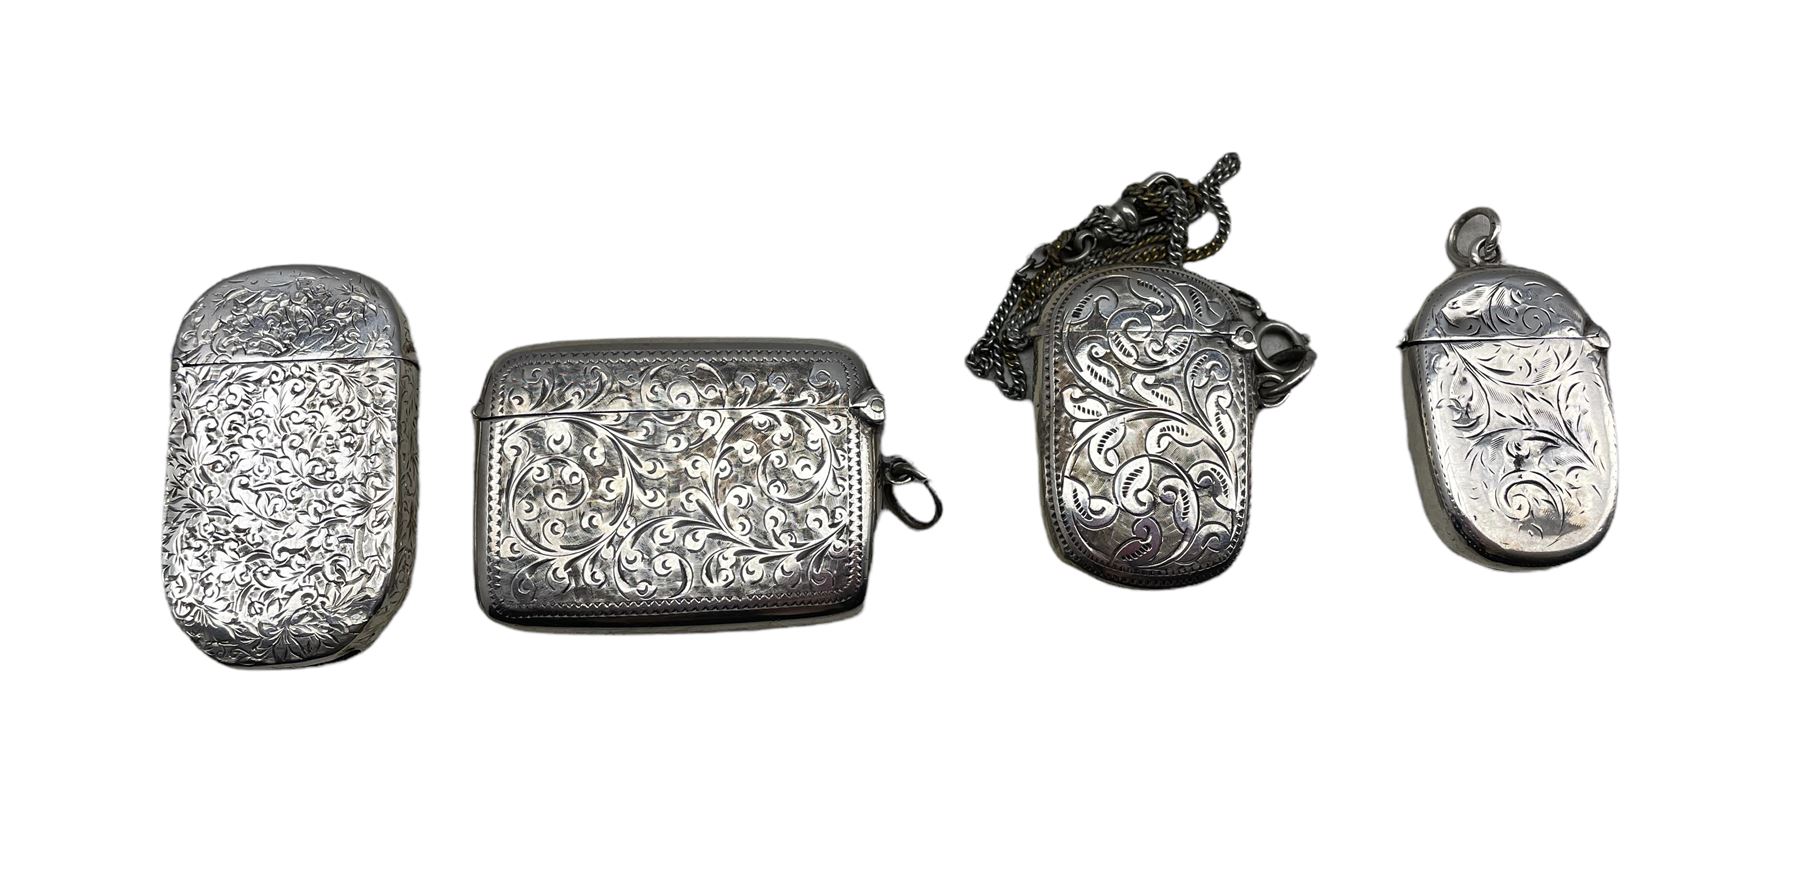 Edwardian rectangular silver vesta case with engraving and initials Birmingham 1903 - Image 2 of 2